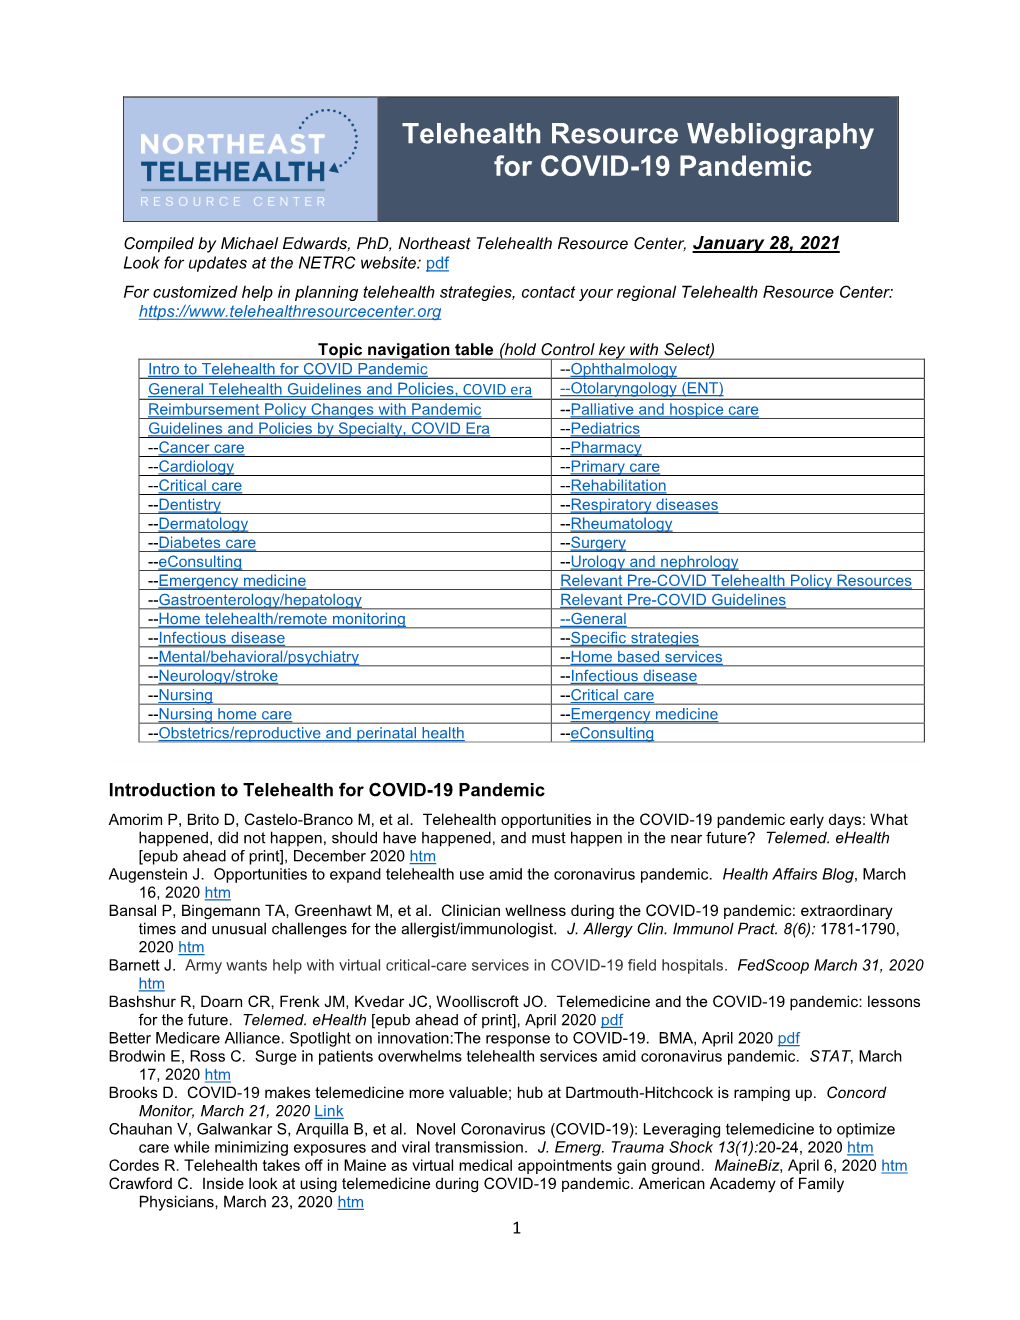 Telehealth Resource Webliography for COVID-19 Pandemic